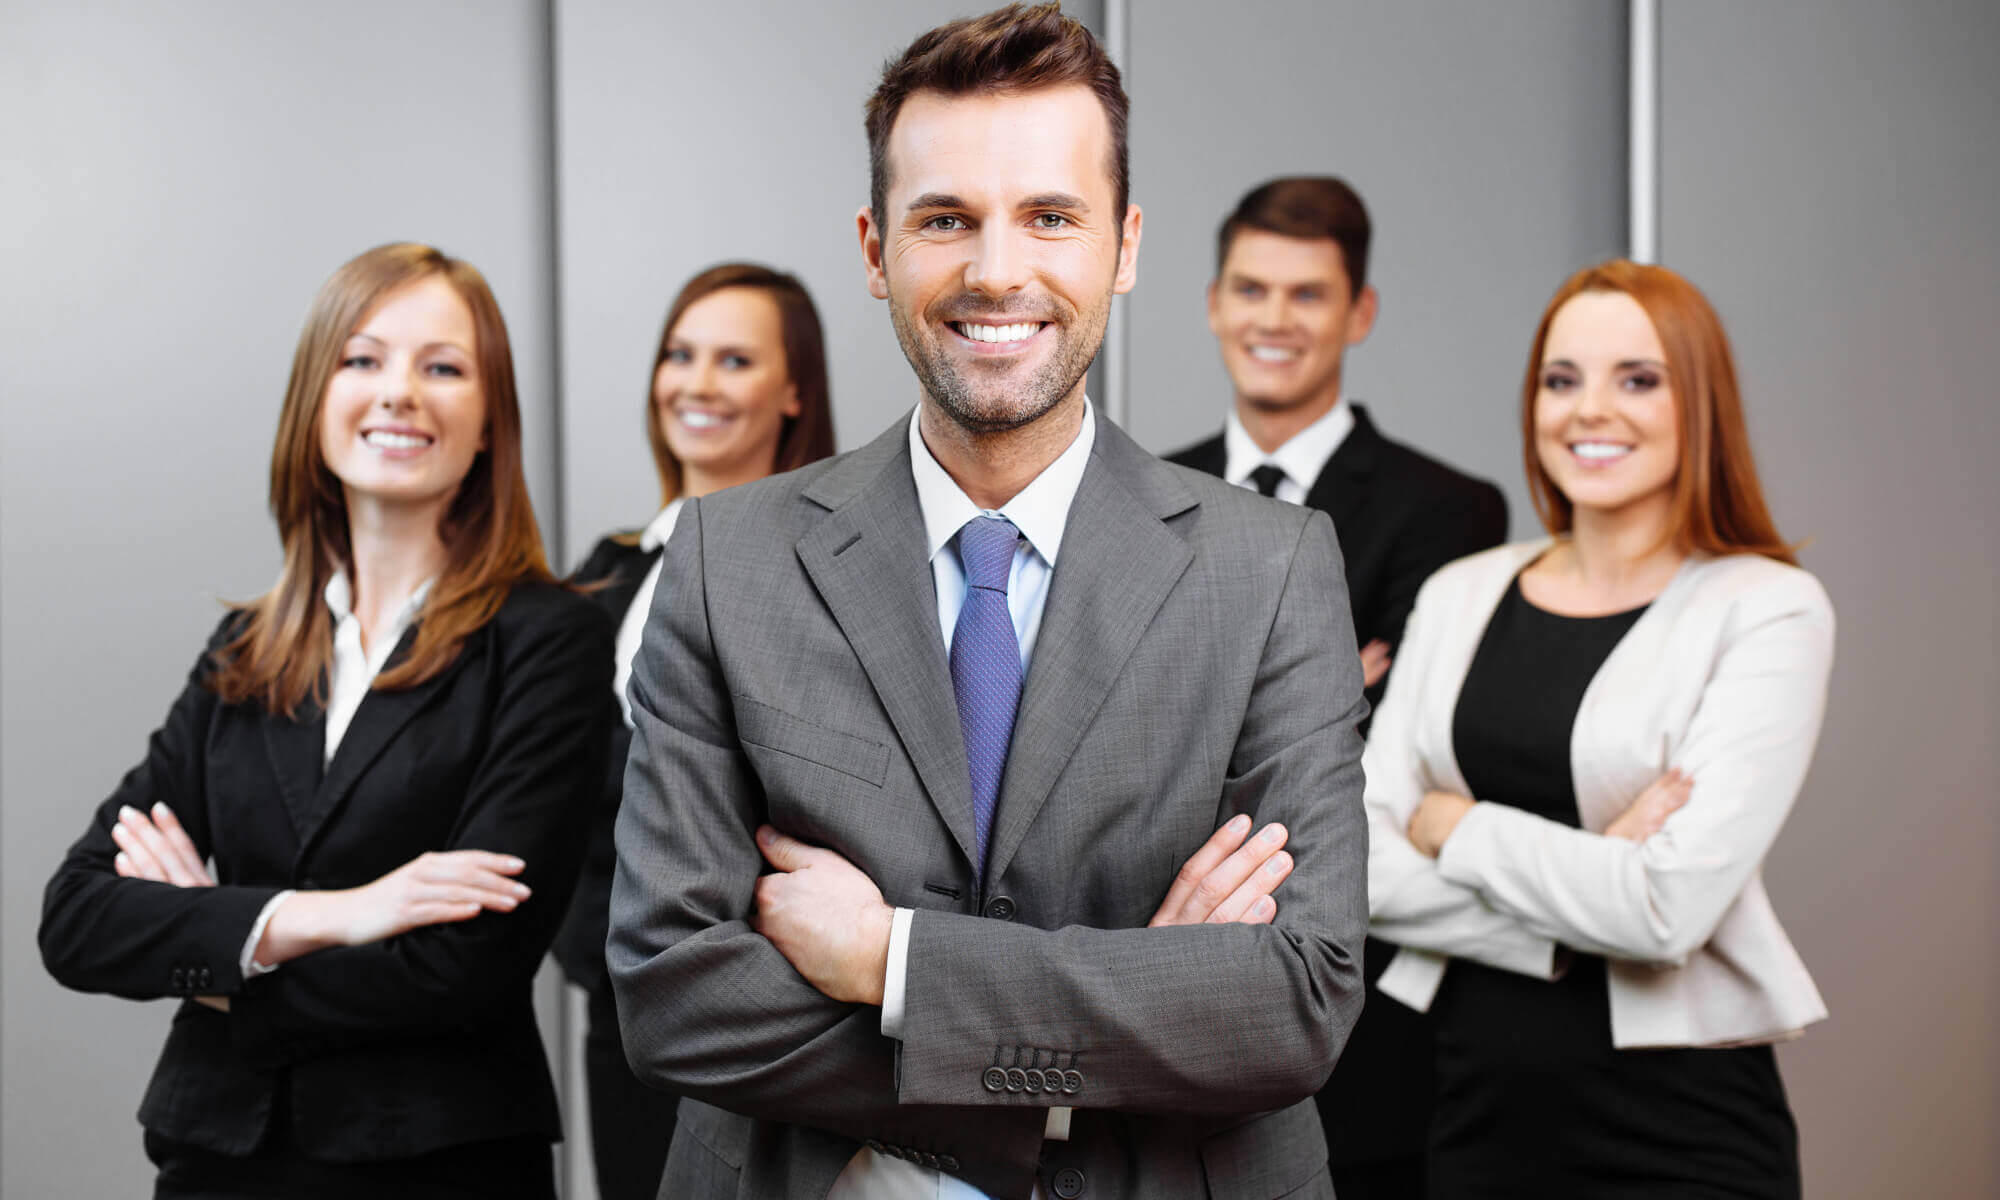 Group of 5 smiling business people looking towards the viewer